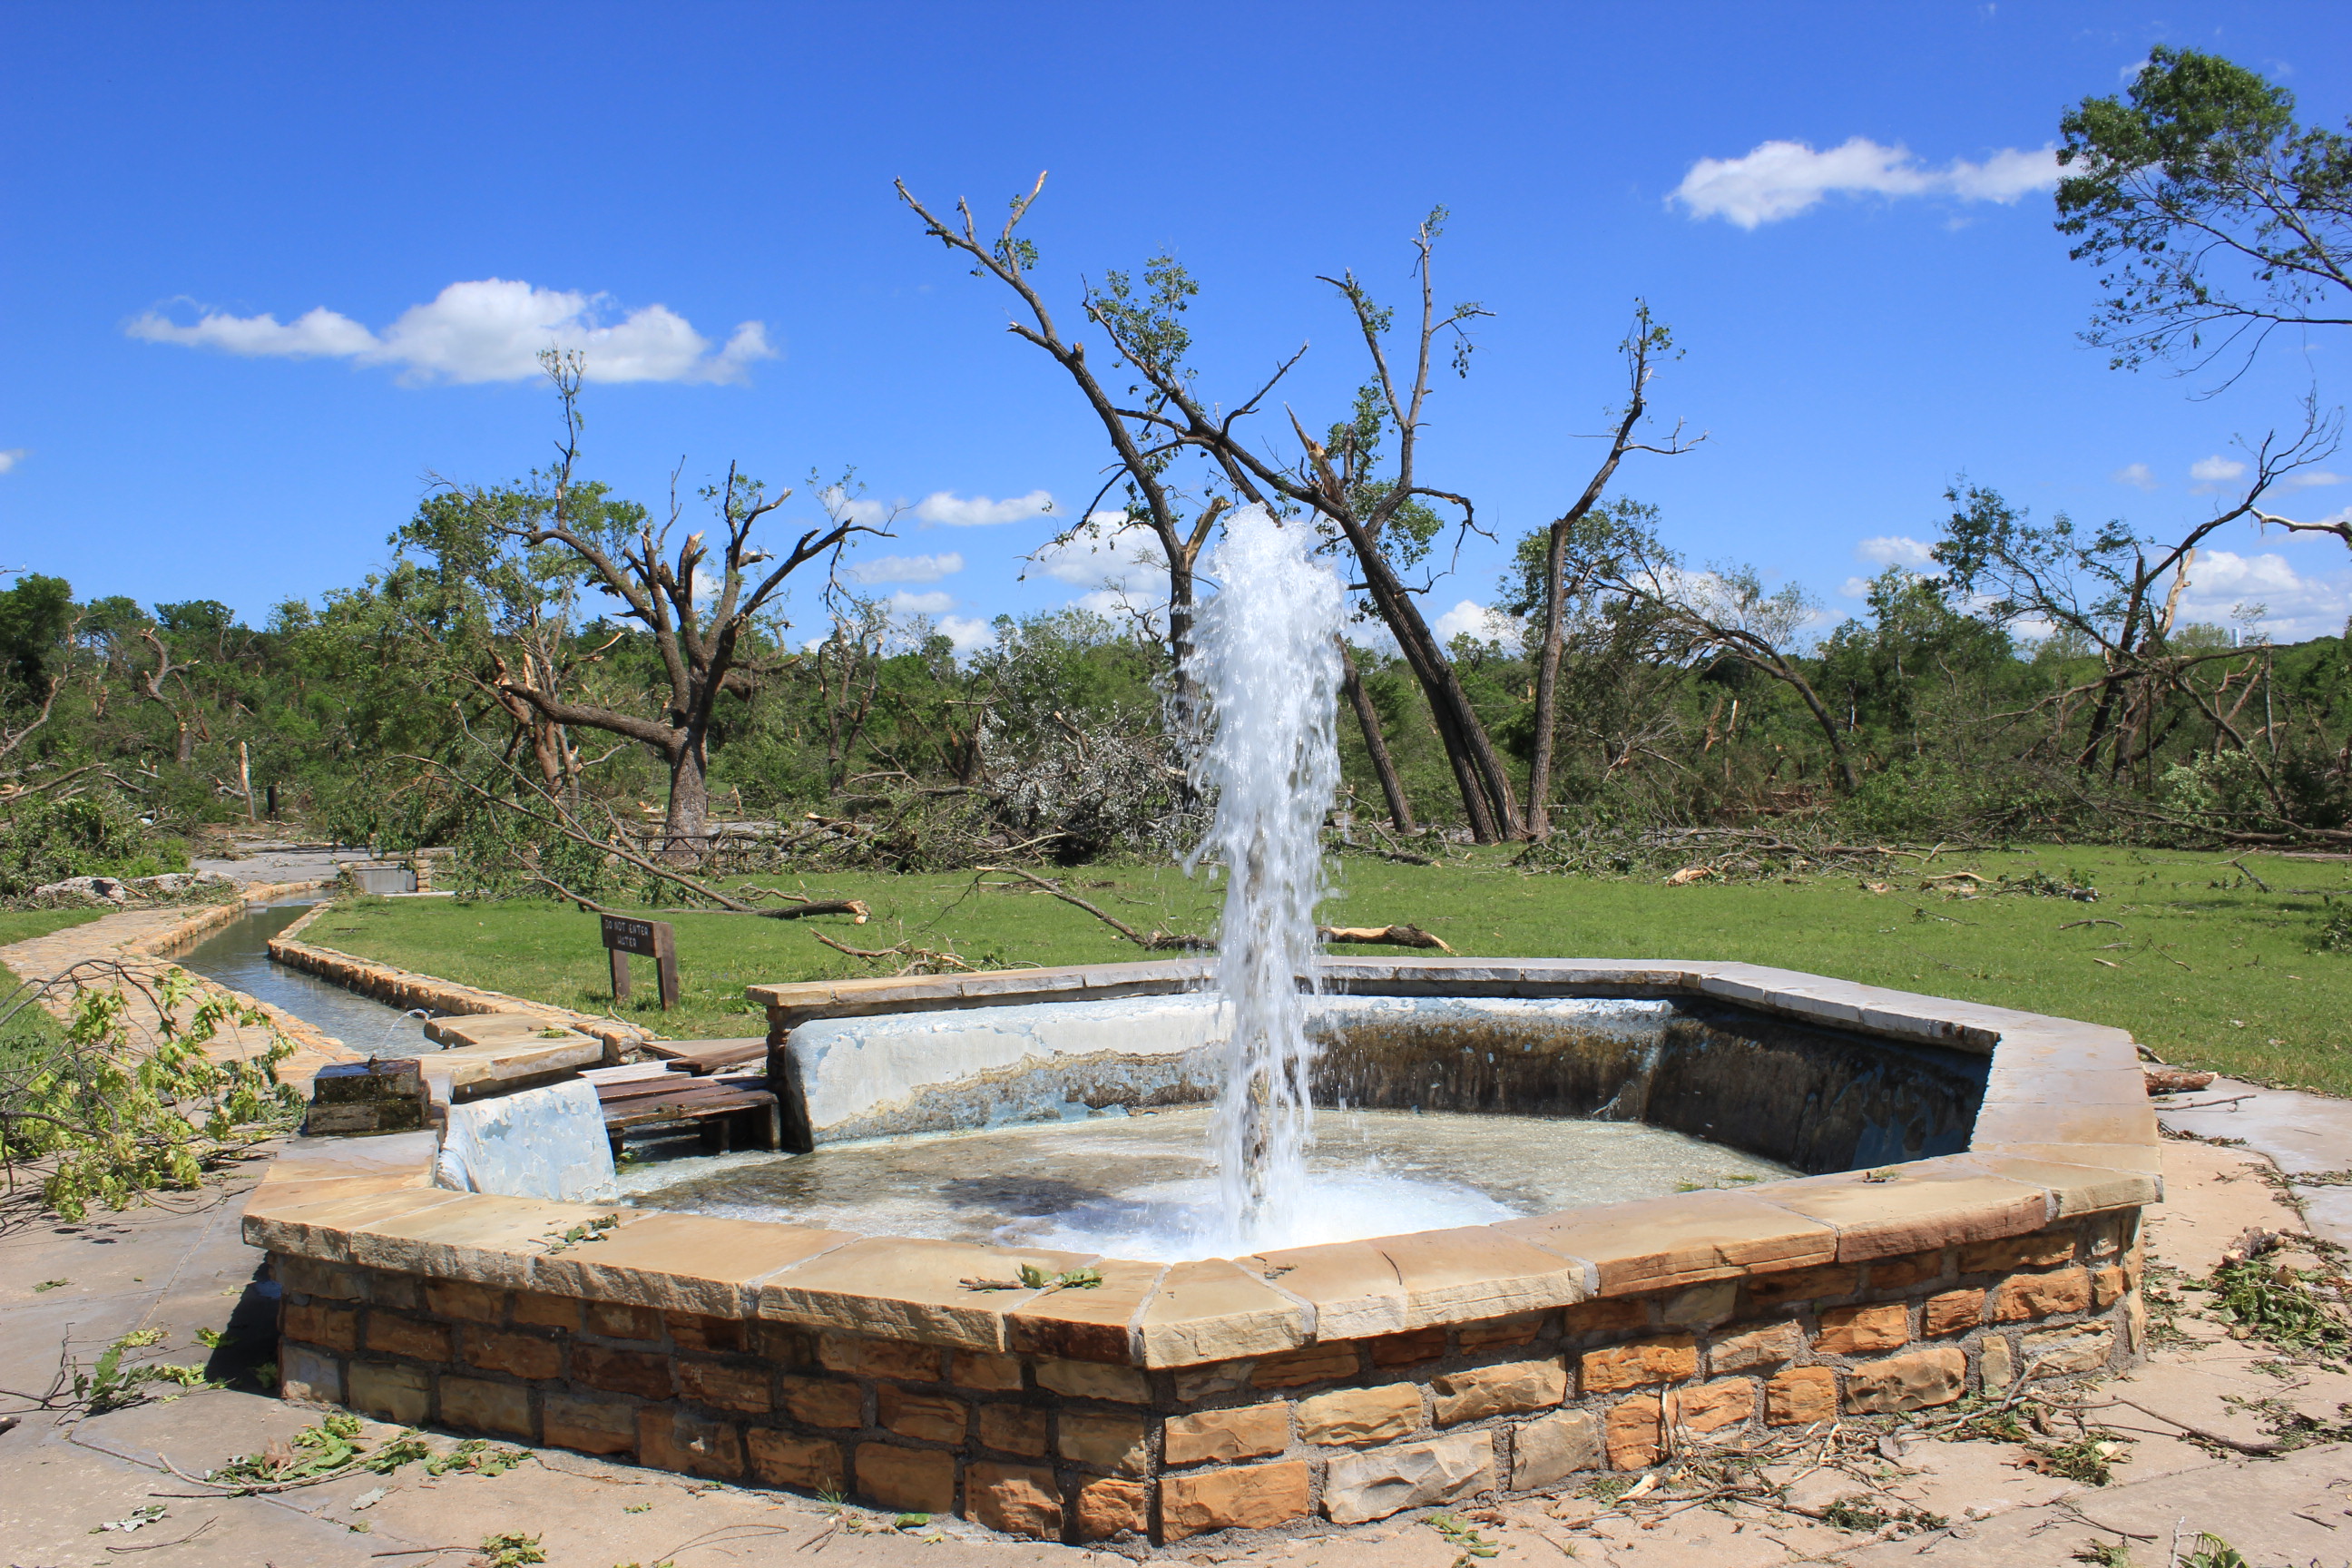 A jet of water rises out of a stone circular basin. Broken trees and limbs are in the area behind and around the basin